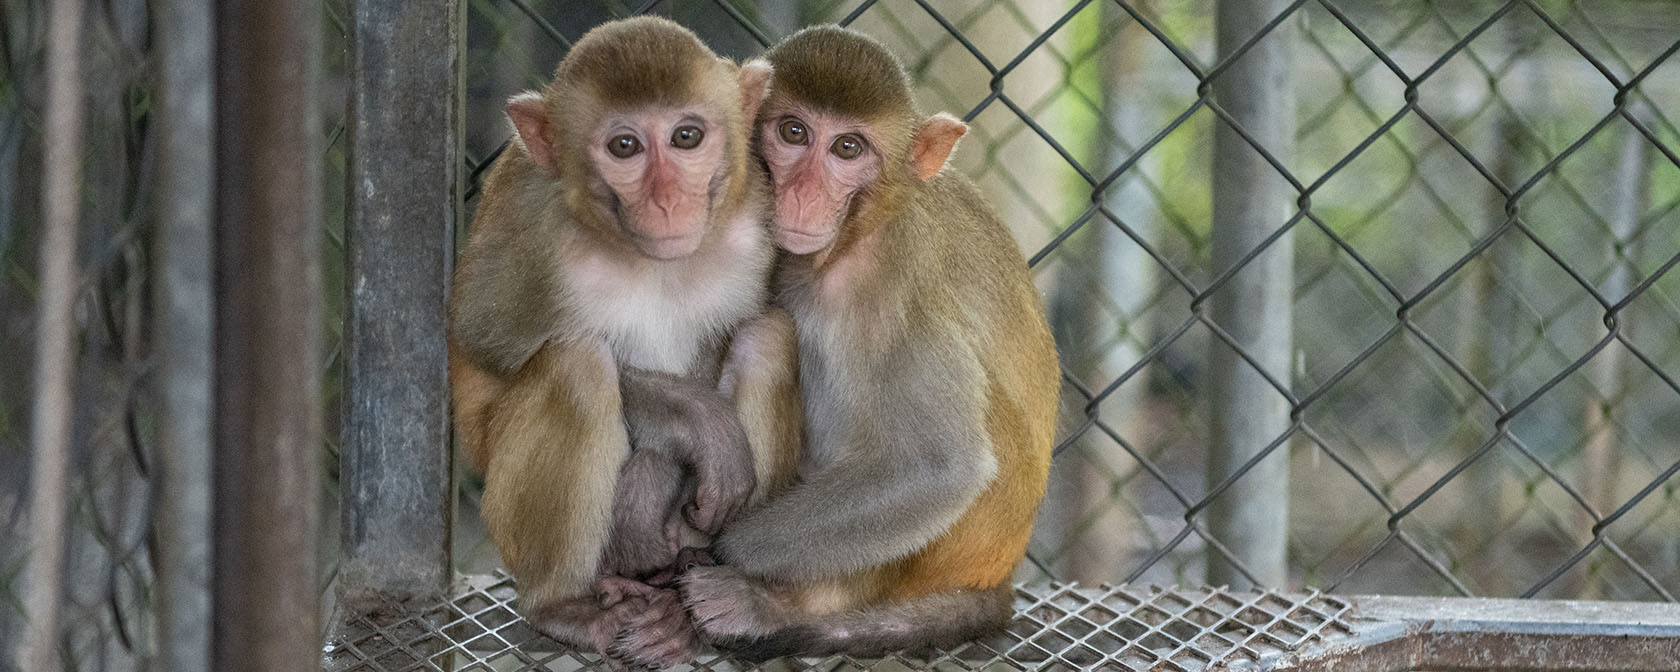 Proposed monkey warehouse in Georgia would be a step backward for animals and science